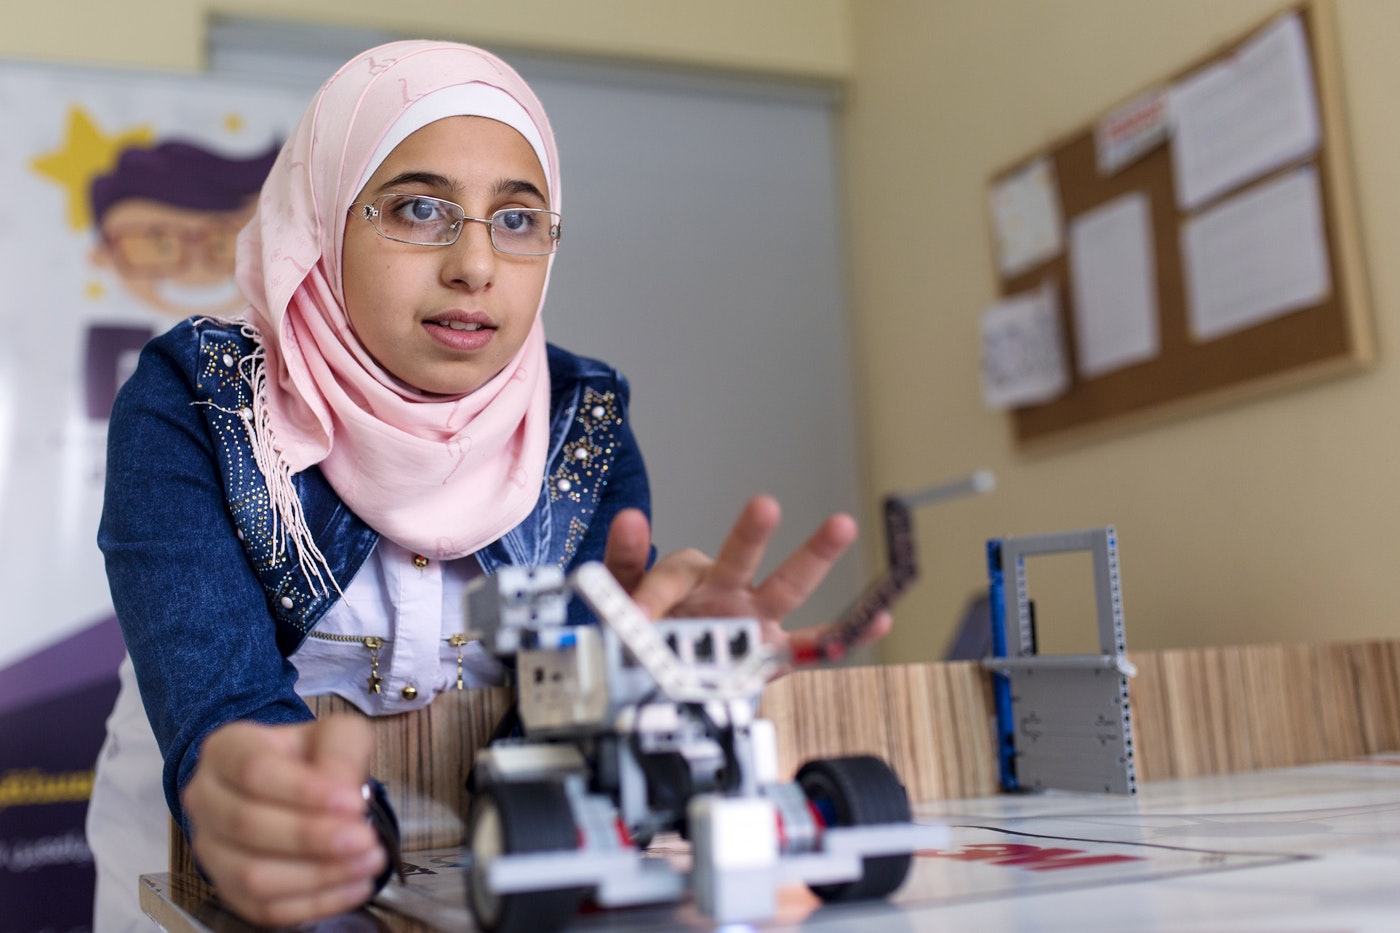 Ethar Kassab, 15, from Aleppo, is in 10th grade and attends a Syrian school in Gaziantep. After school, she attends a club run by a group of Syrian engineers and physics teachers that teaches children how to operate and program robots. (Rosie Thompson/ Theirworld)